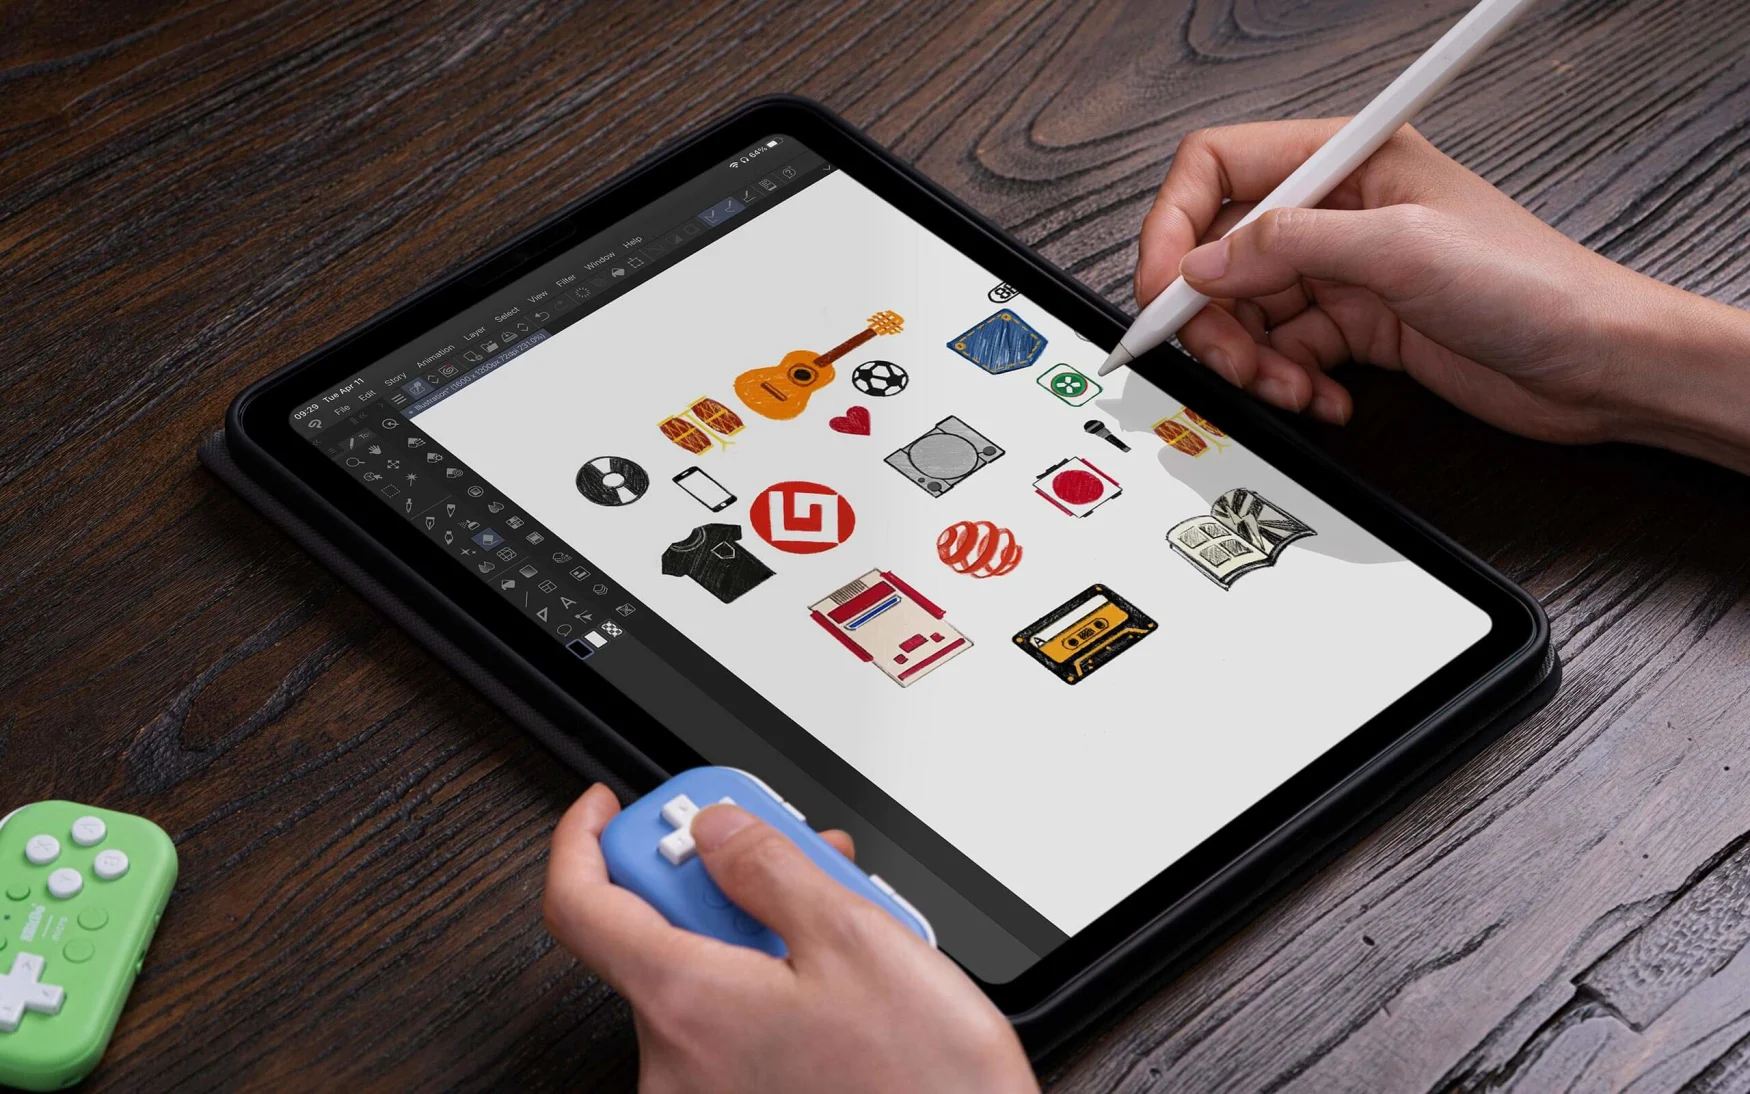 Marketing photo of a person holding an 8BitDo Micro (tiny blue) controller in their left hand and an Apple Pencil in their right hand as they sketch in an illustration app on an iPad. It sits on a dark wooden table with a green 8BitDo Micro gamepad sitting to the left.